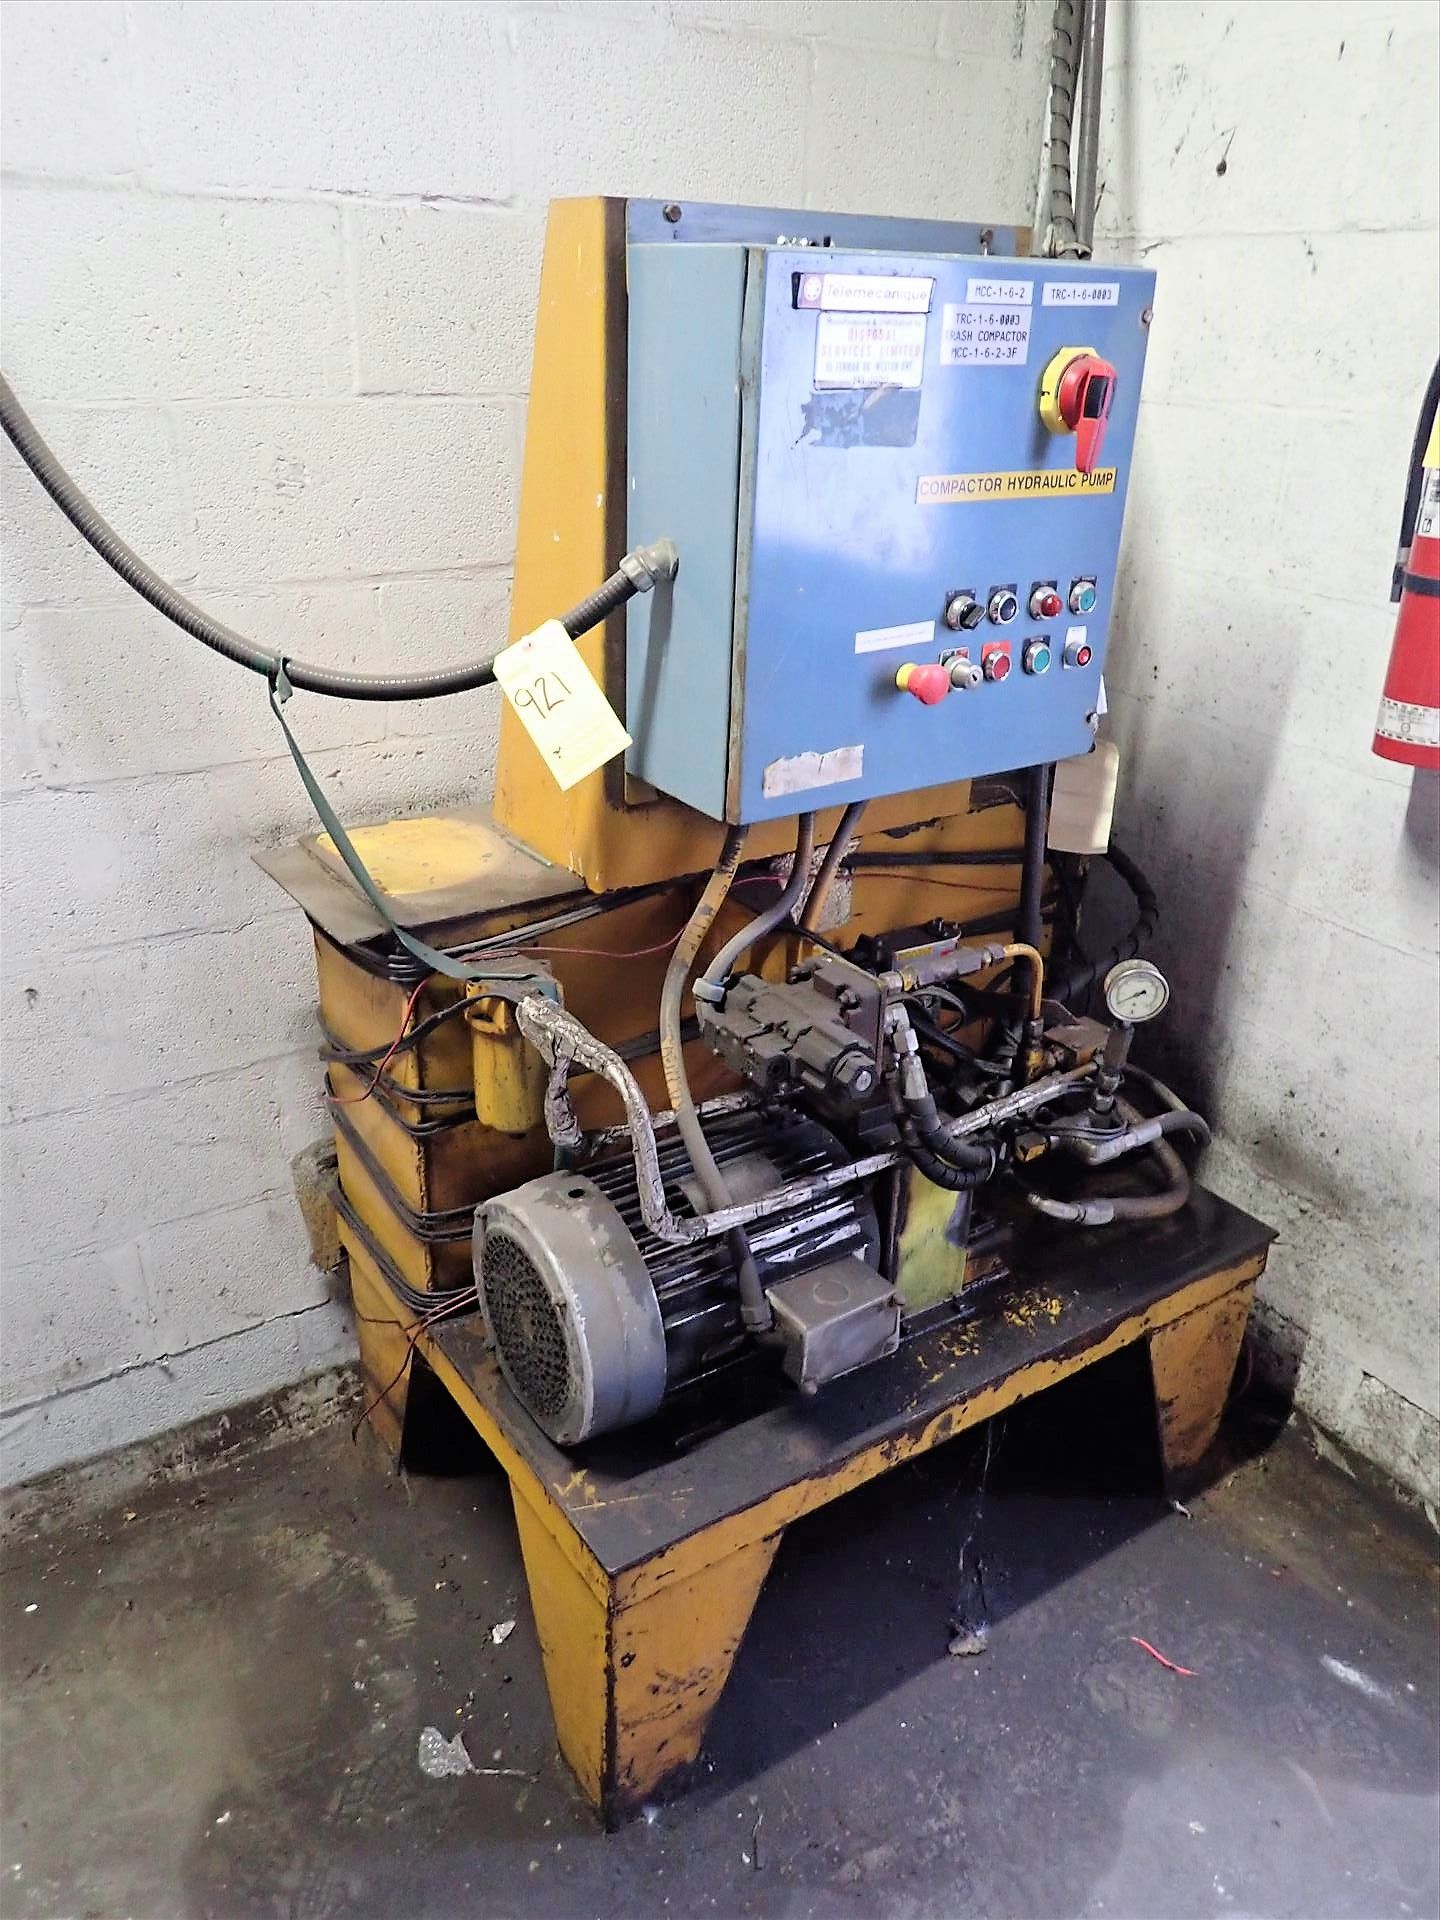 DisposalServices trash compactor, 10 hp [Meat Grinding Area]